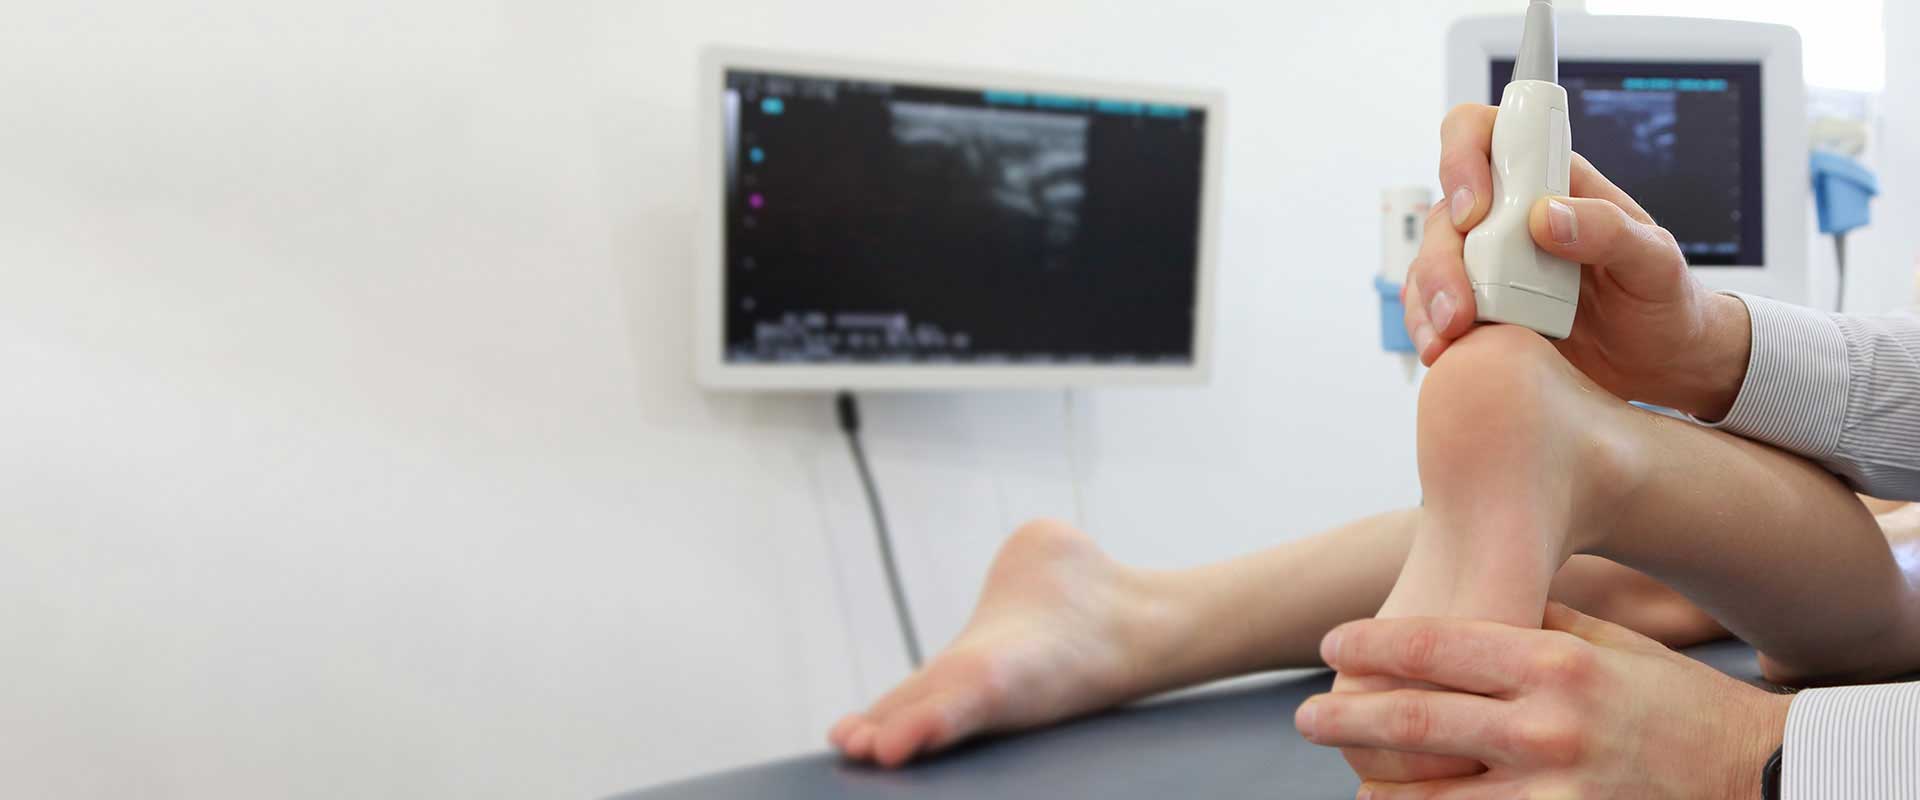 Foot and Ankle Center foot ultrasound